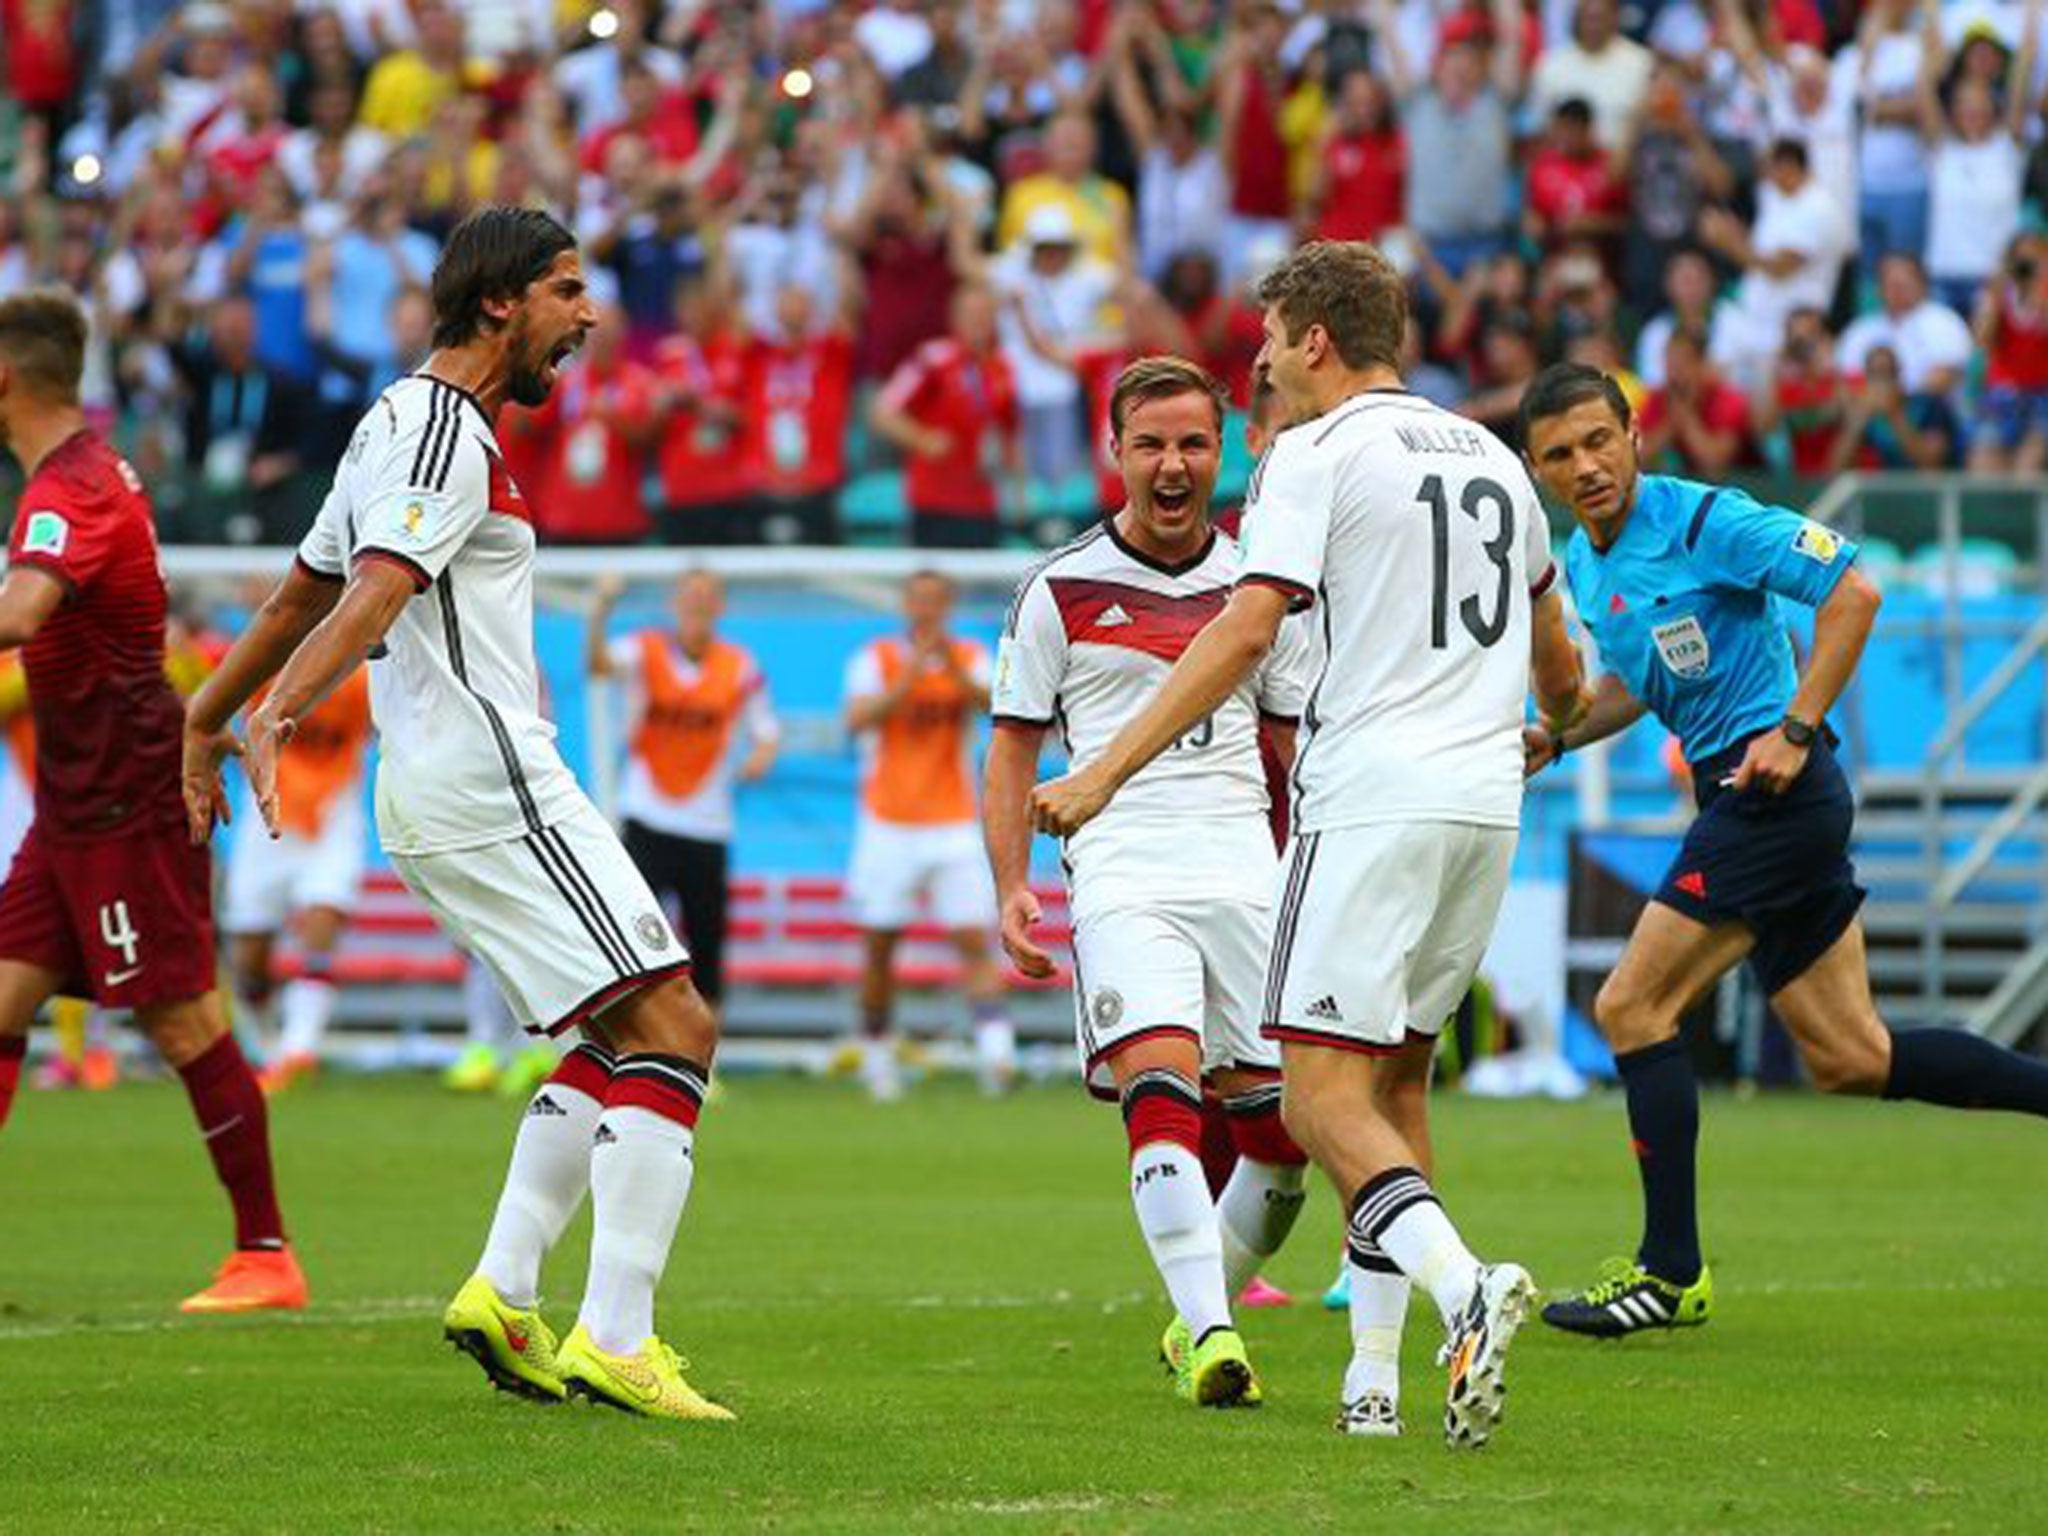 Thomas Muller of Germany celebrates scoring the first goal of the game